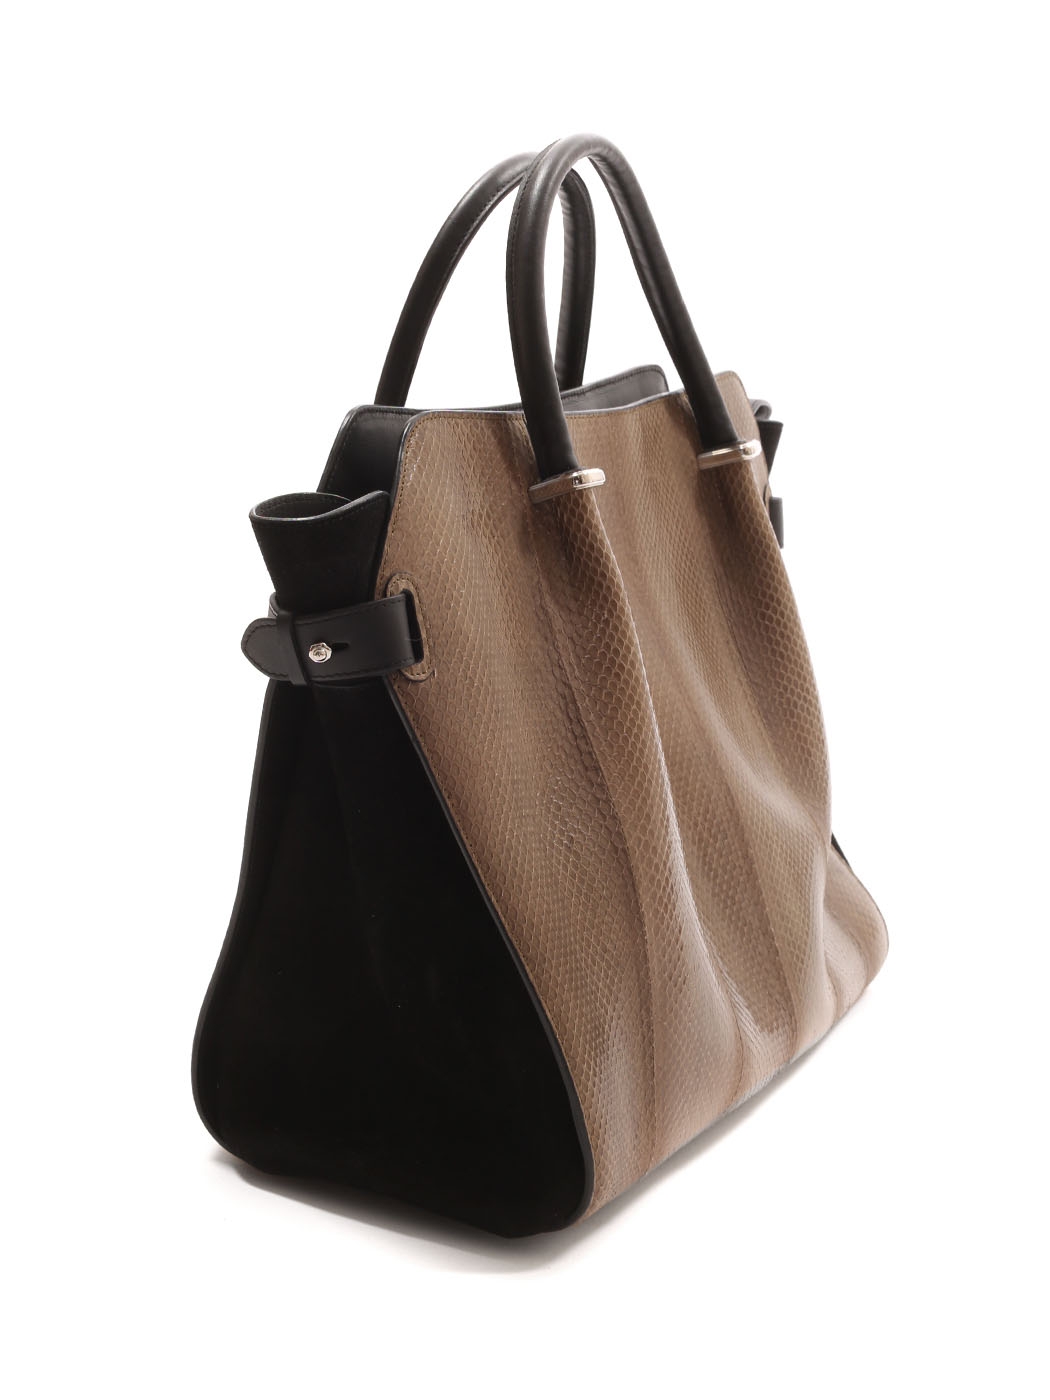 Boutique NINA RICCI MARCHE Brown snake leather and black suede tote bag ...